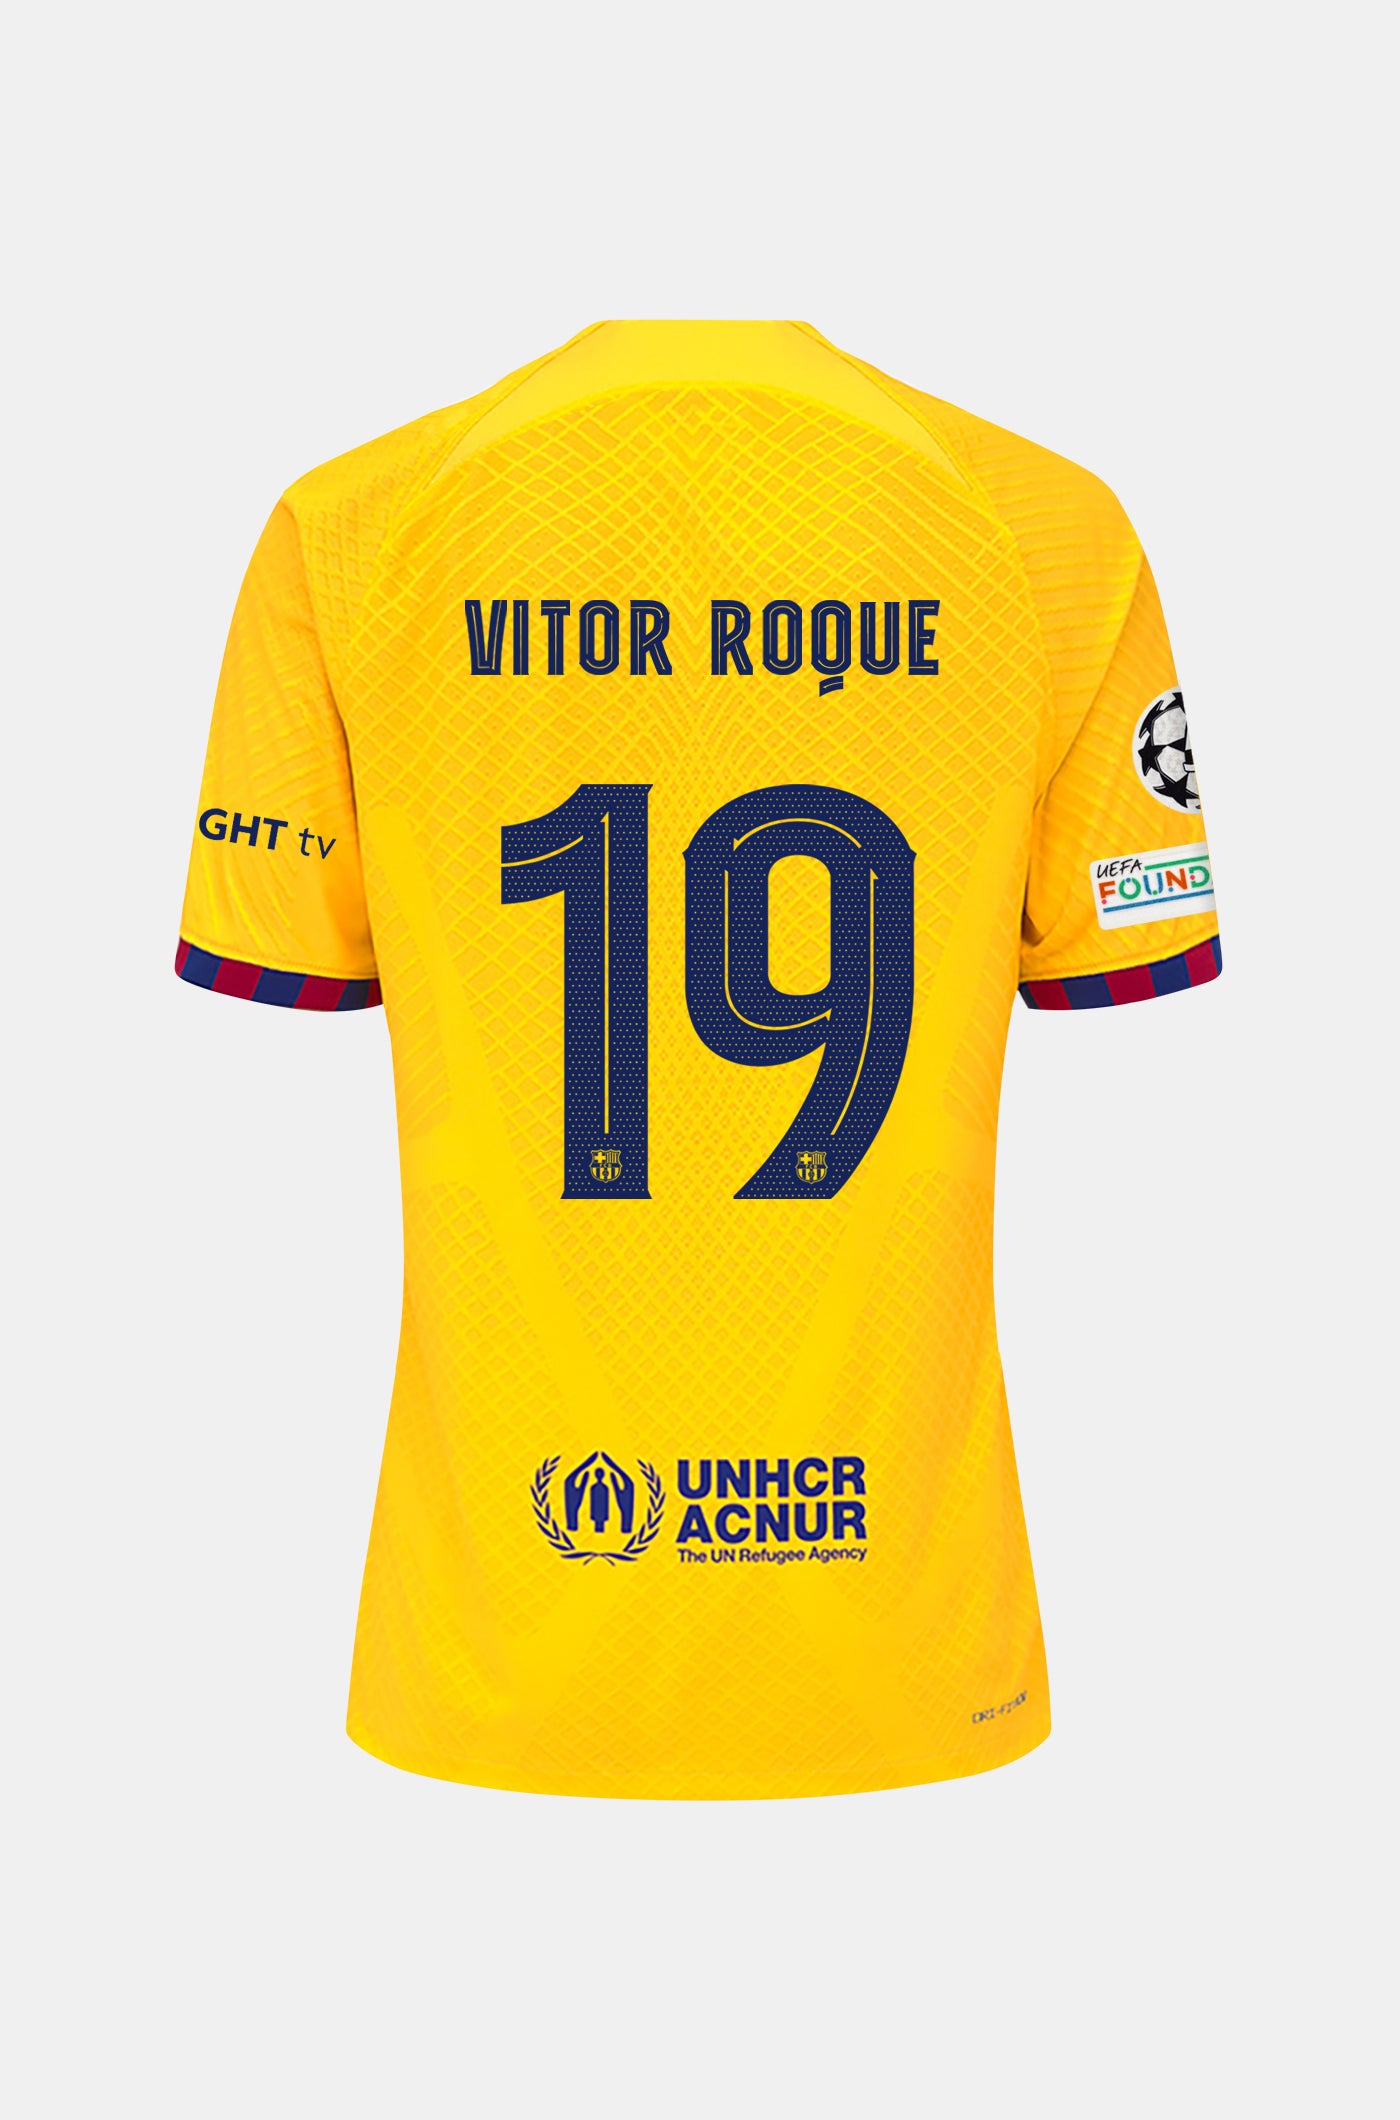 UCL FC Barcelona fourth shirt 23/24 Player’s Edition - VITOR ROQUE